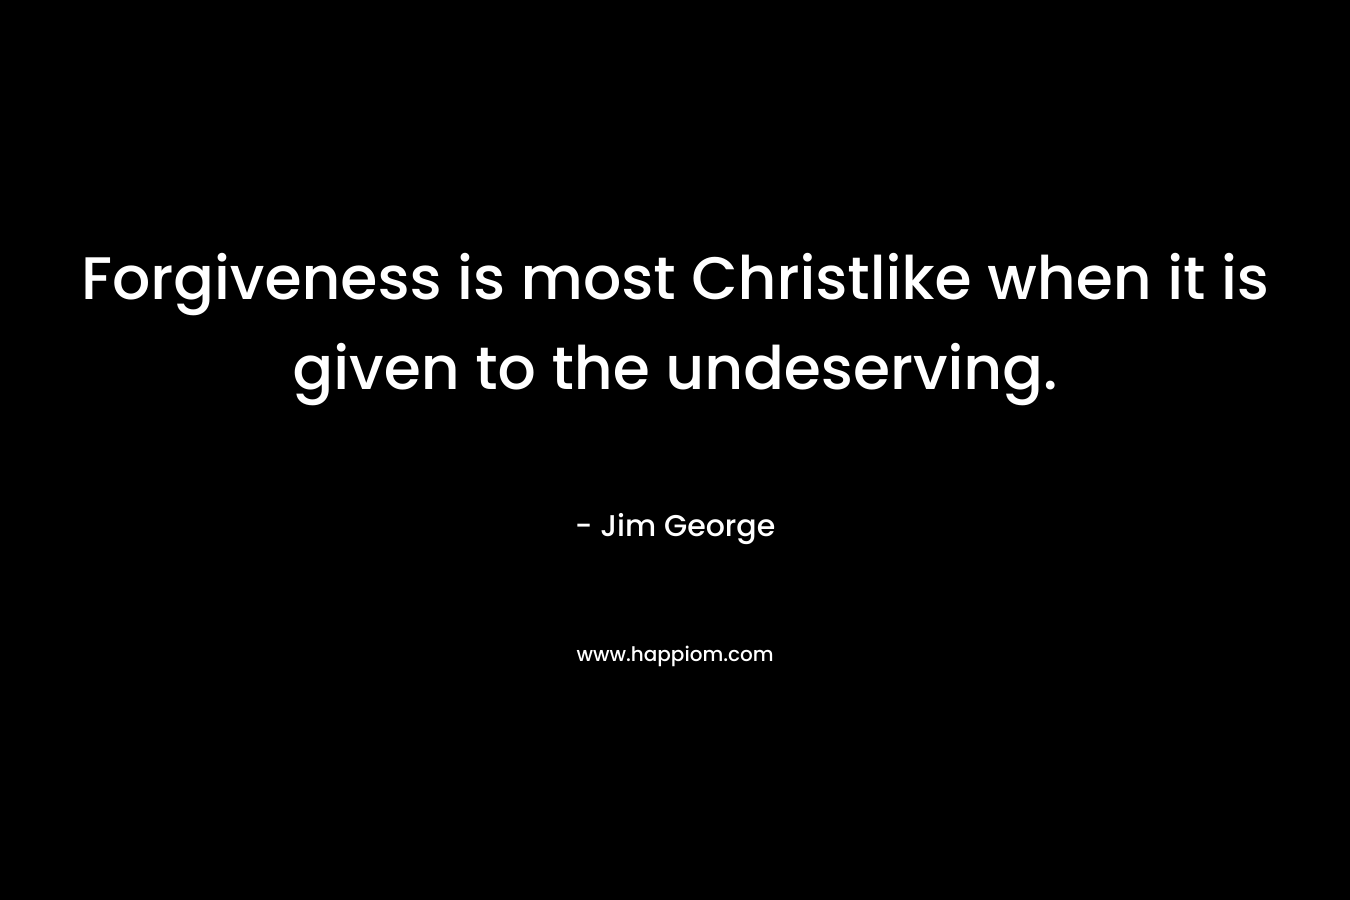 Forgiveness is most Christlike when it is given to the undeserving.